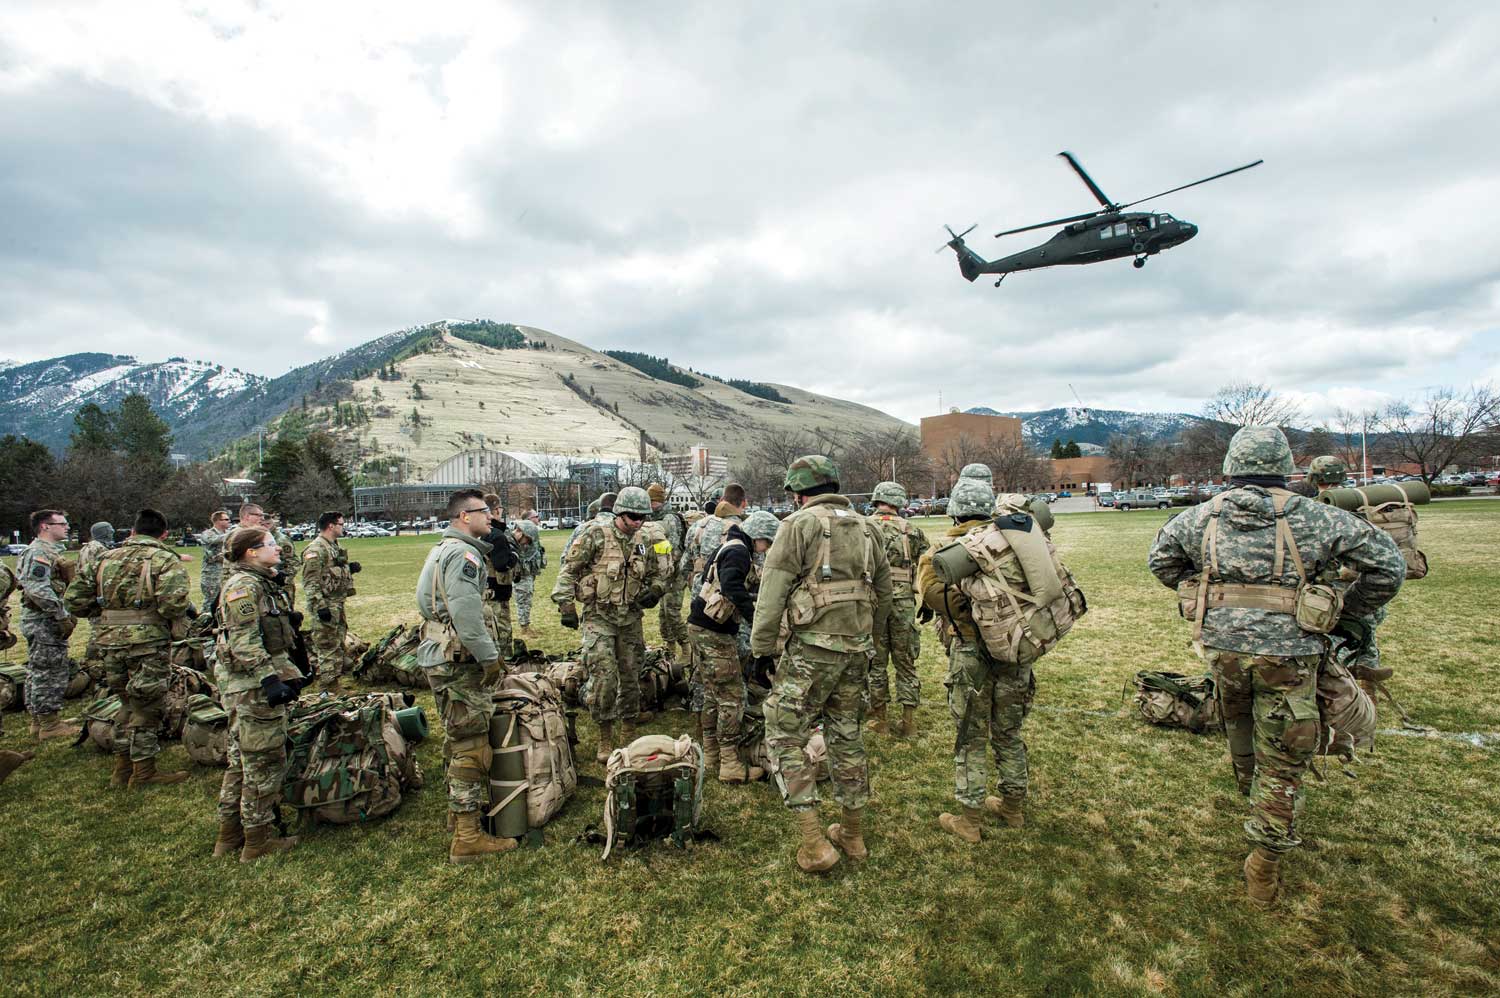 Grizzly Battalion cadets watch a Montana National Guard Blackhawk helicopter take off from campus during April training exercises.